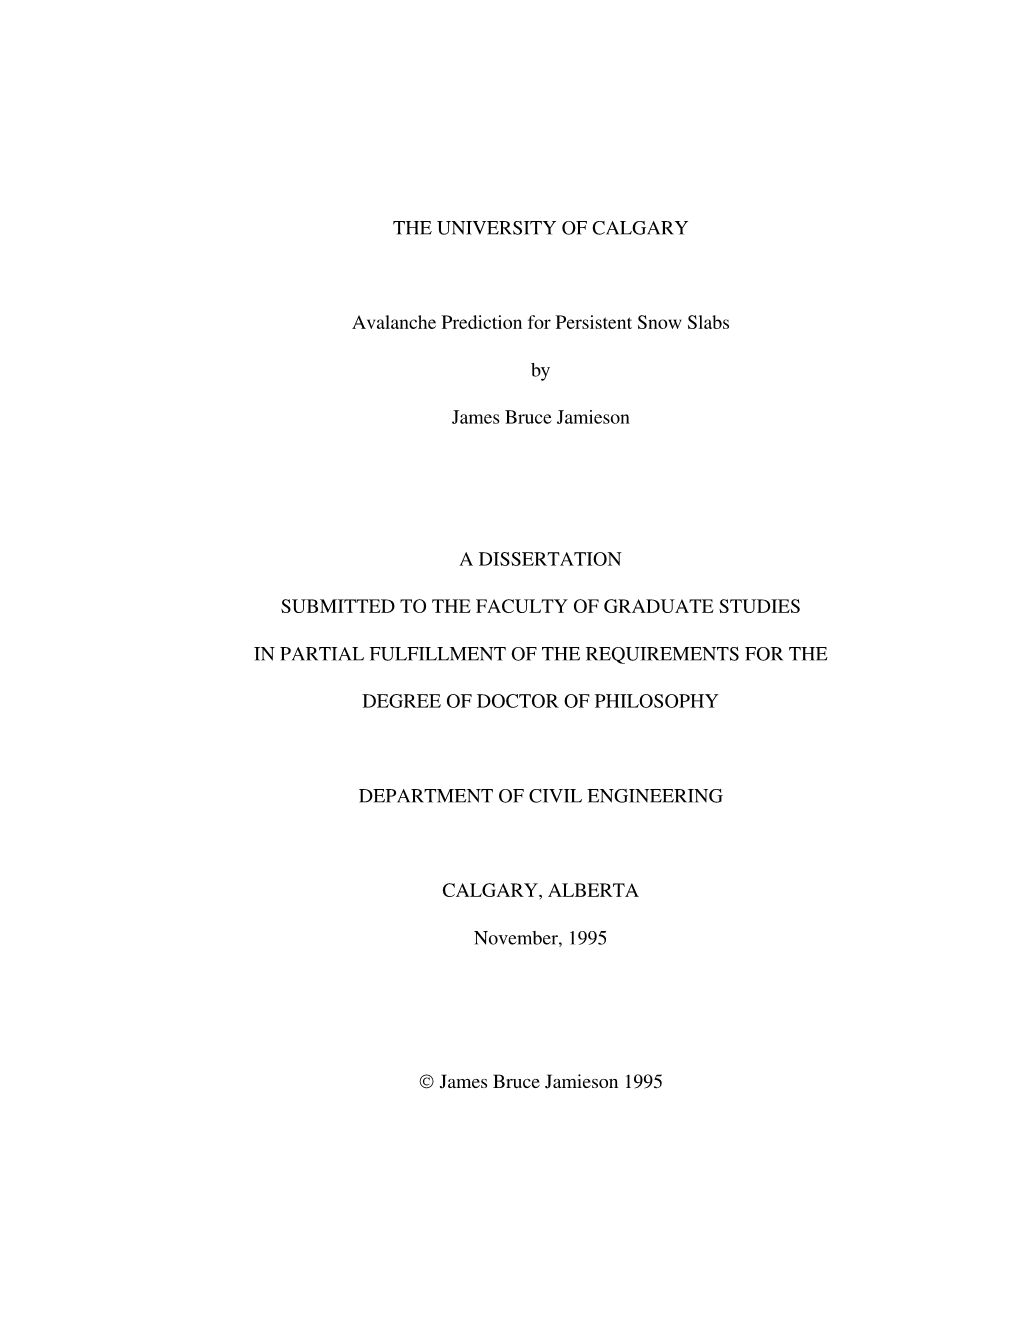 THE UNIVERSITY of CALGARY Avalanche Prediction for Persistent Snow Slabs by James Bruce Jamieson a DISSERTATION SUBMITTED TO